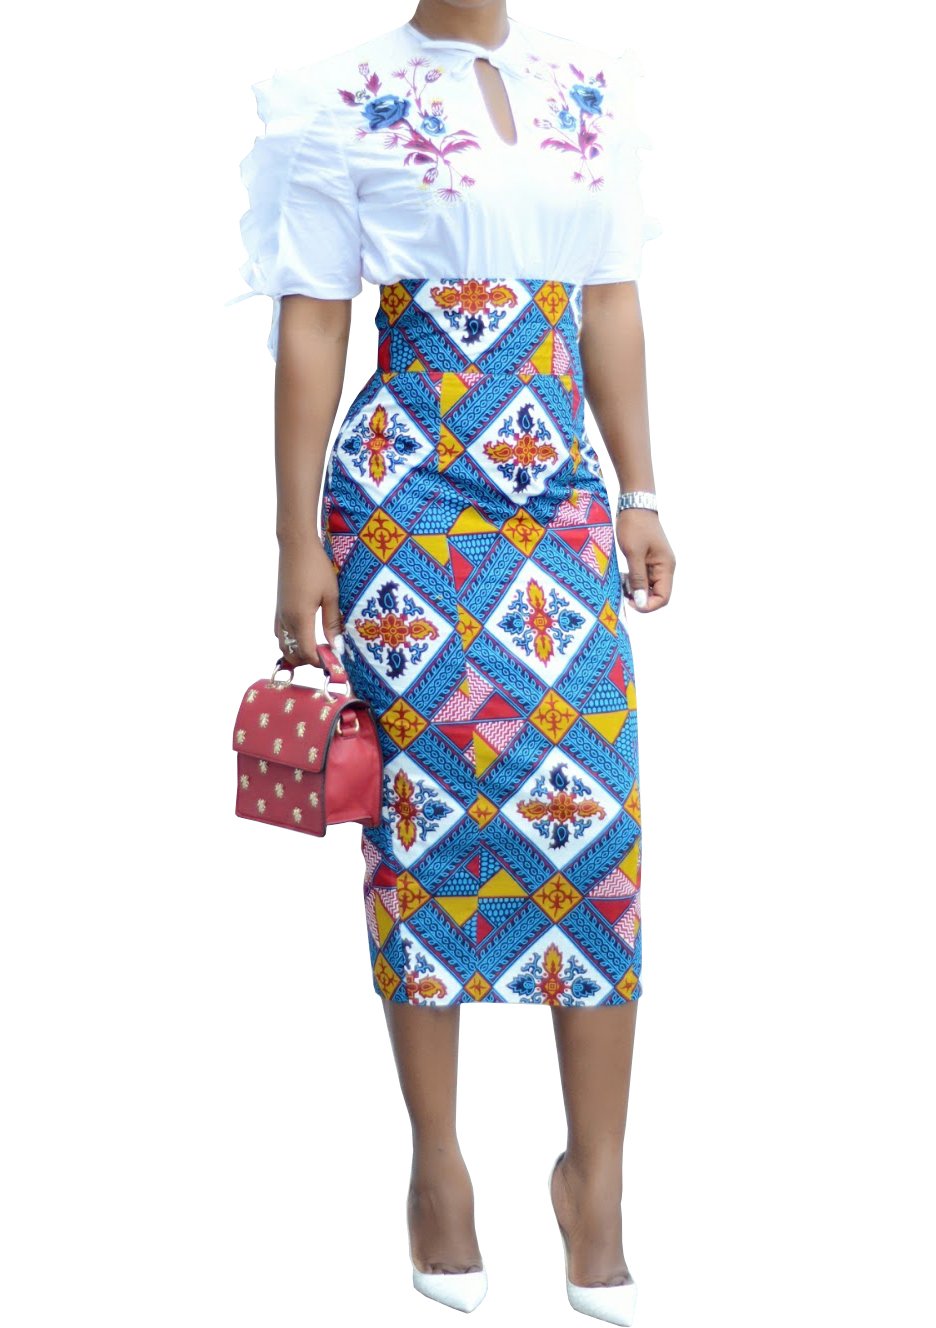 short african skirts
long african skirts
white african print skirt
blue african skirt